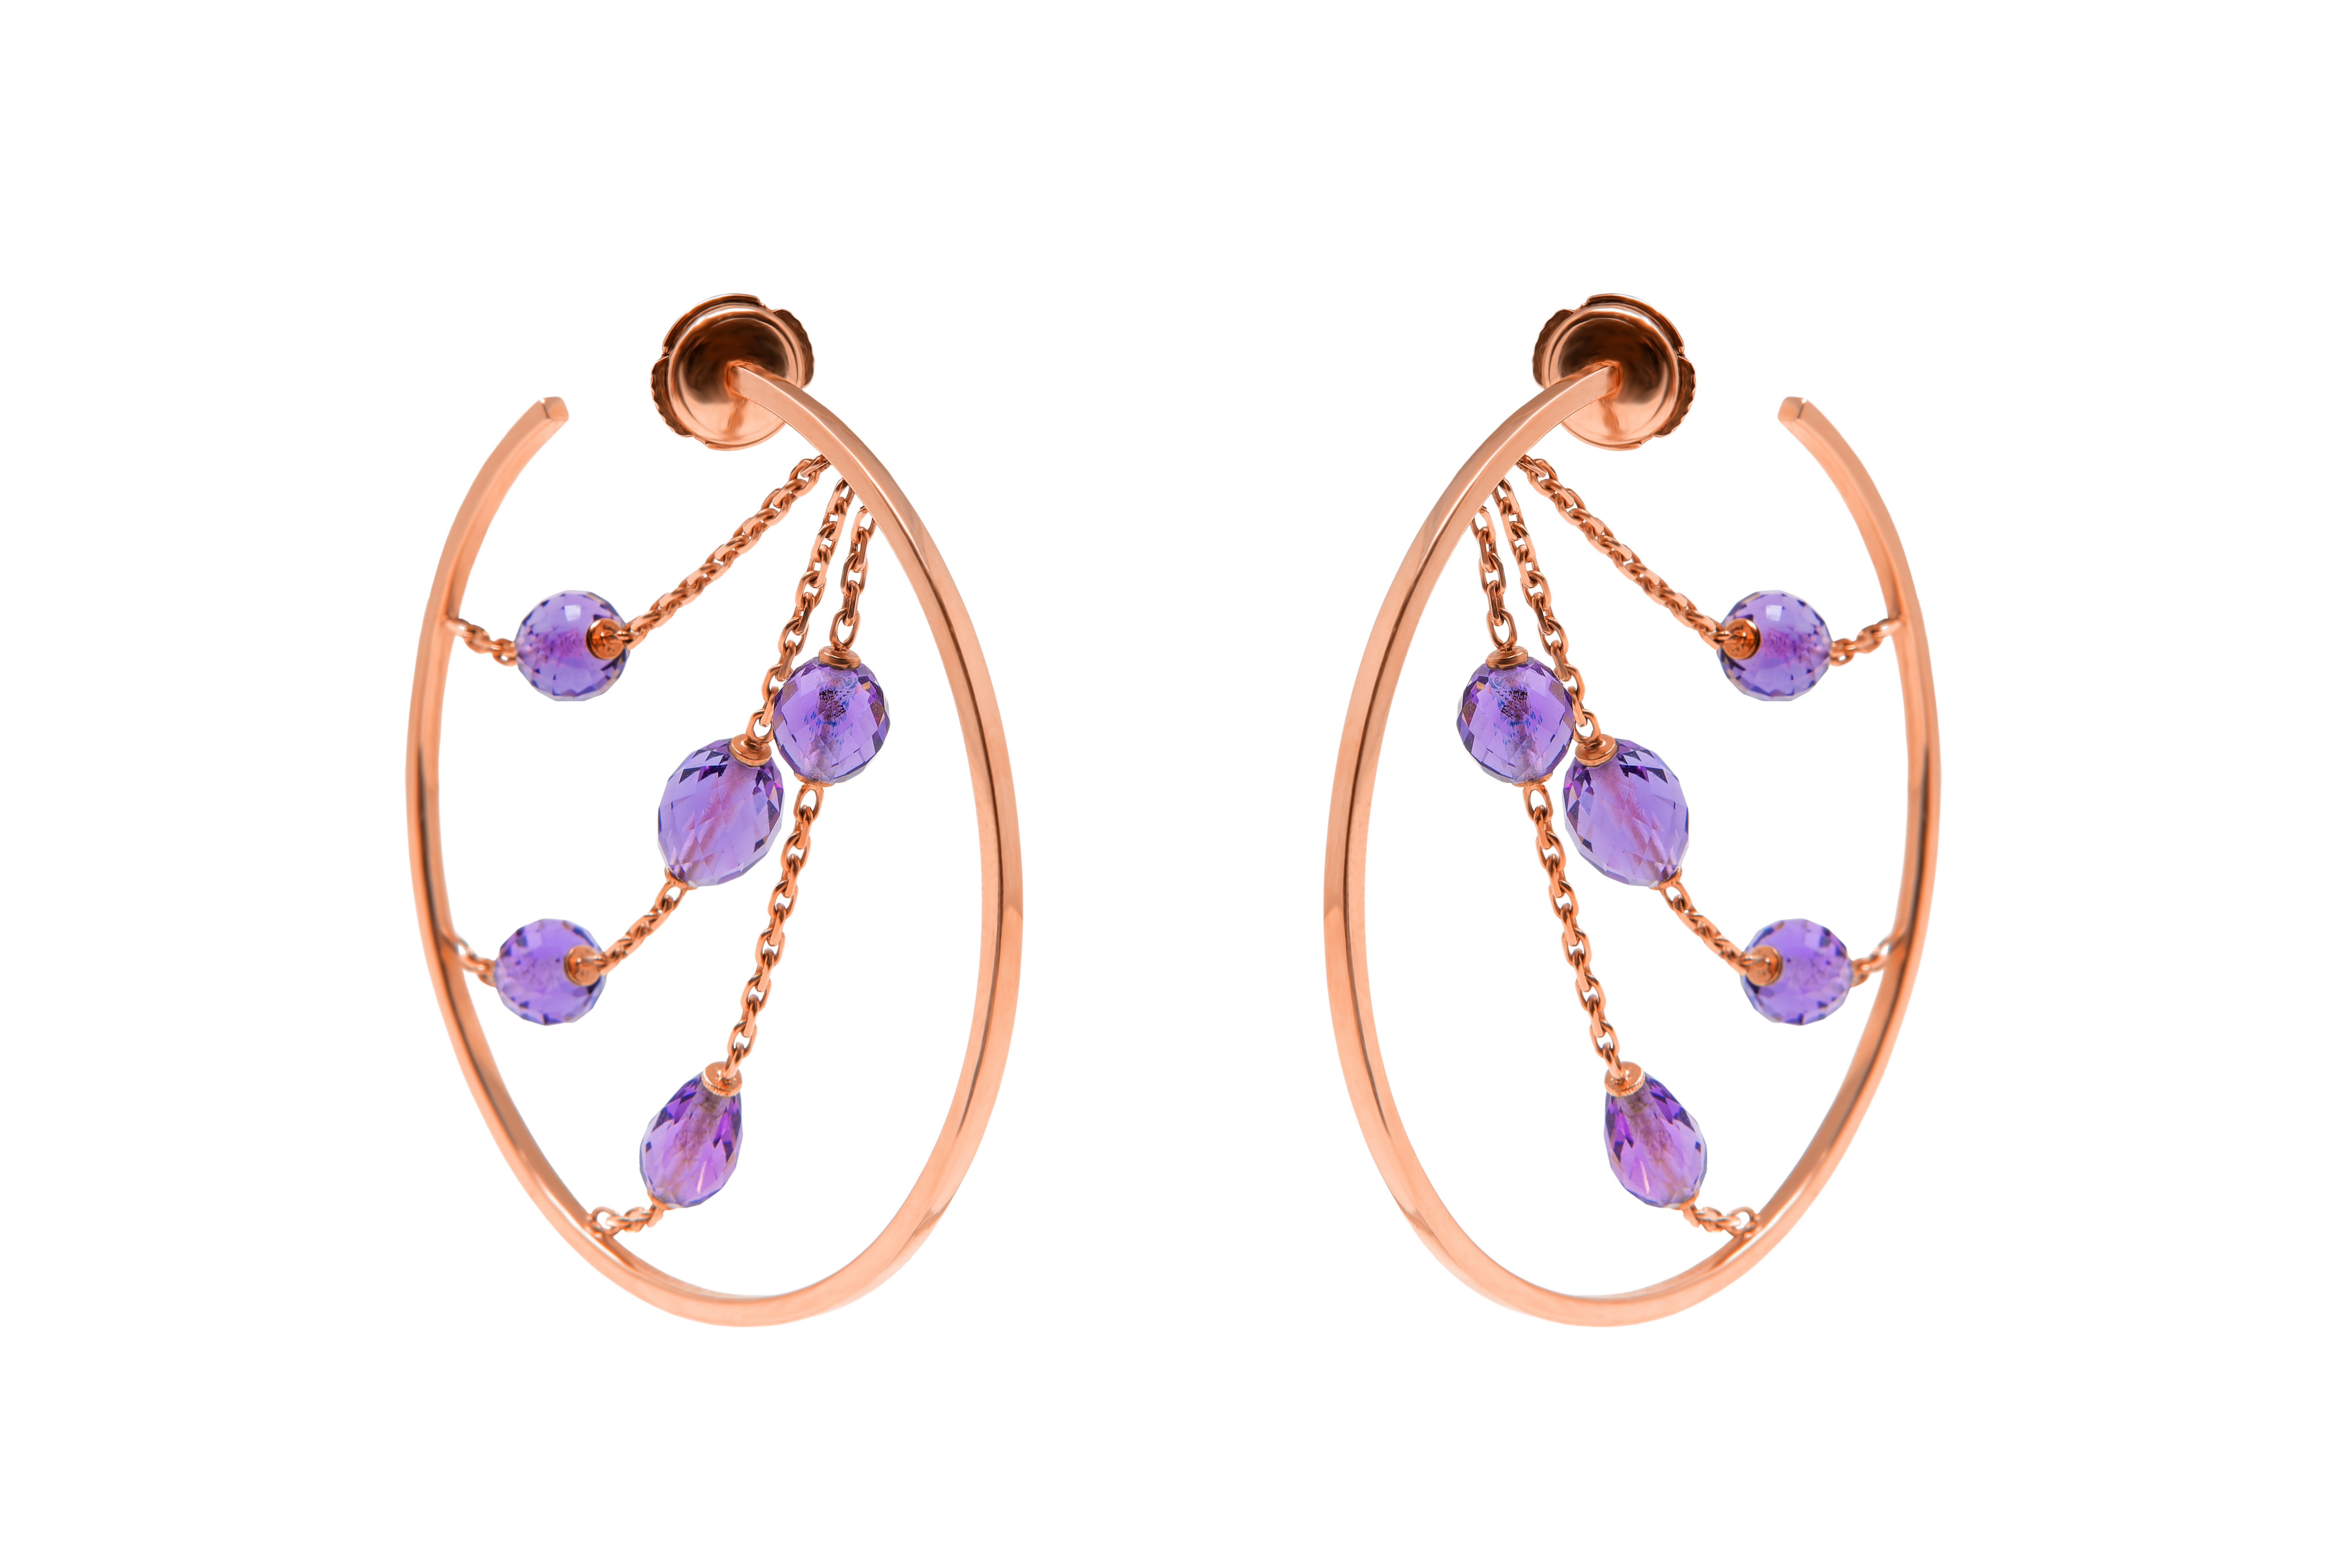 18 Carat Gold Hoops with Briolette cut Amethysts on 